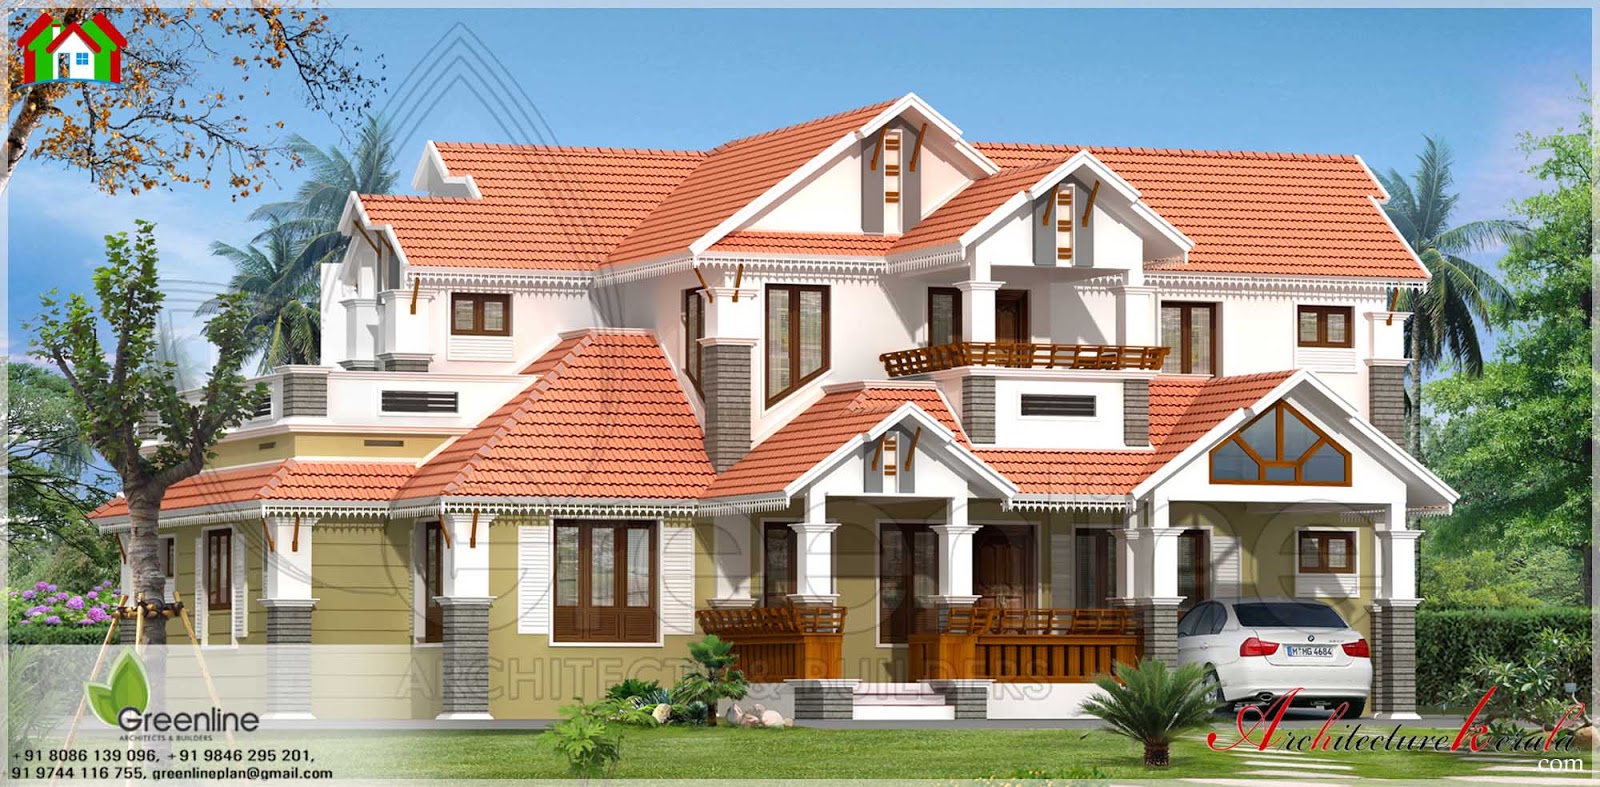  2500  SQUARE  FEET  KERALA  TRADITIONAL STYLE HOUSE  ELEVATION  